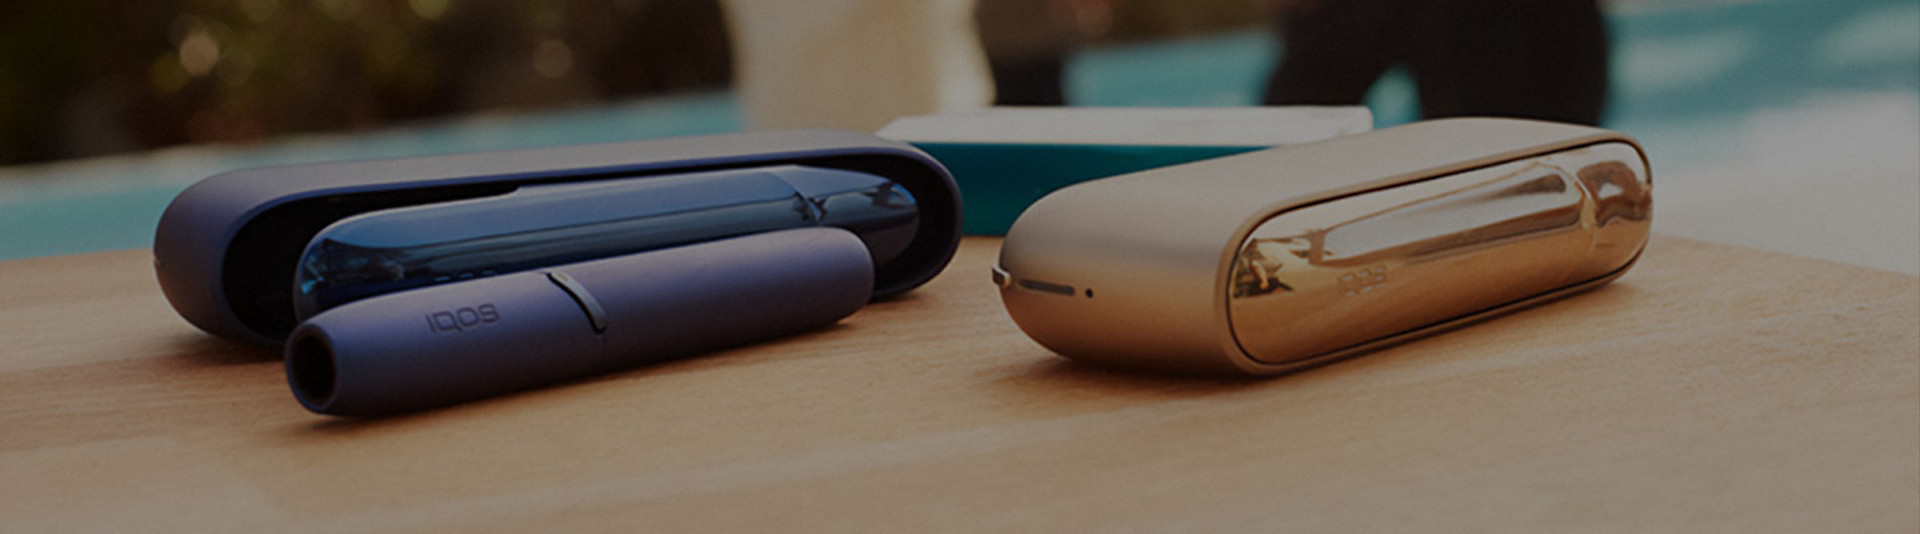 Different IQOS devices on a table 